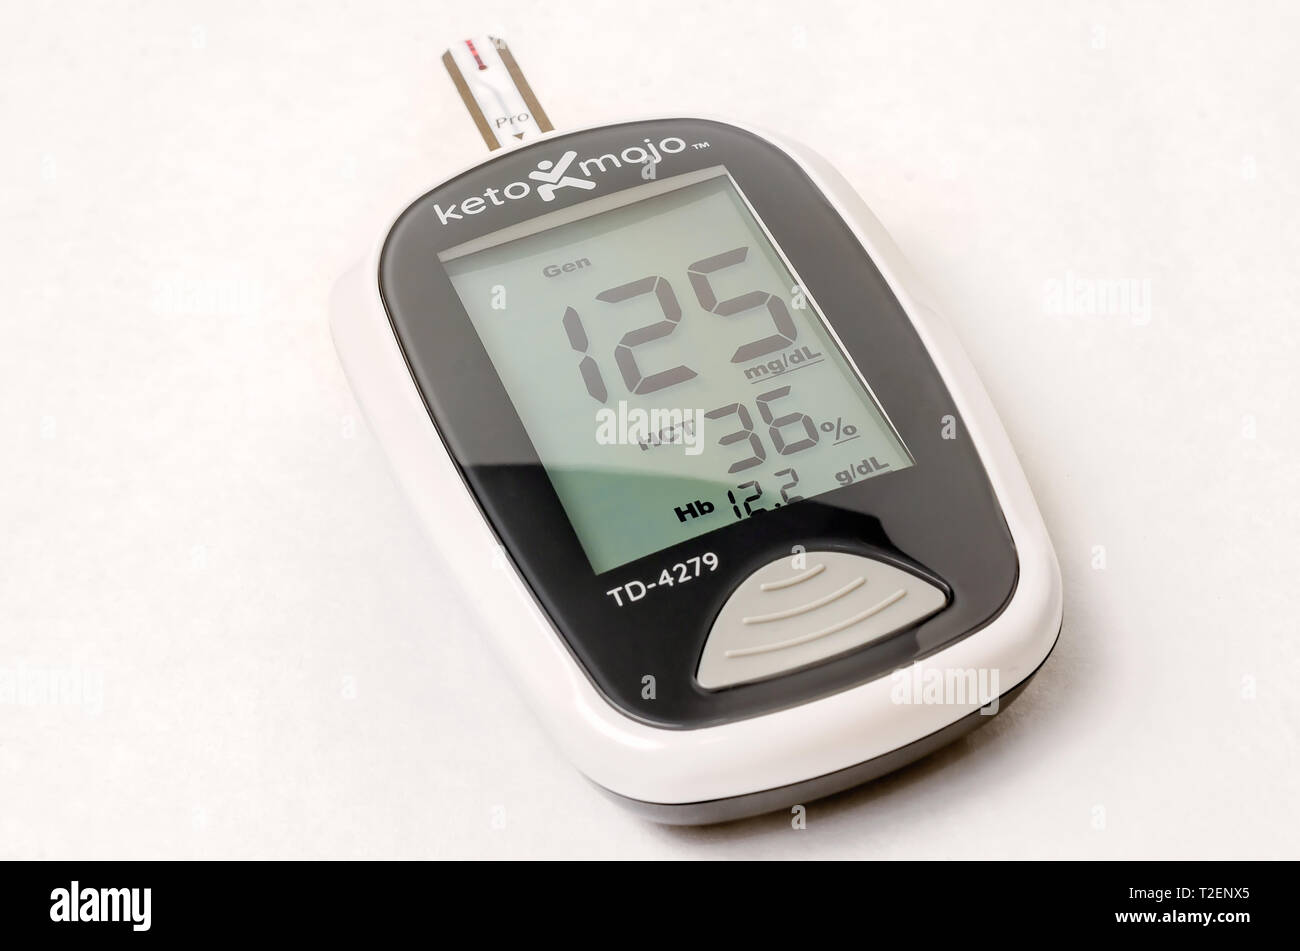 A Keto-Mojo ketone and blood glucose meter is pictured on white, along with a blood glucose test strip, March 30, 2019, in Coden, Alabama. Stock Photo